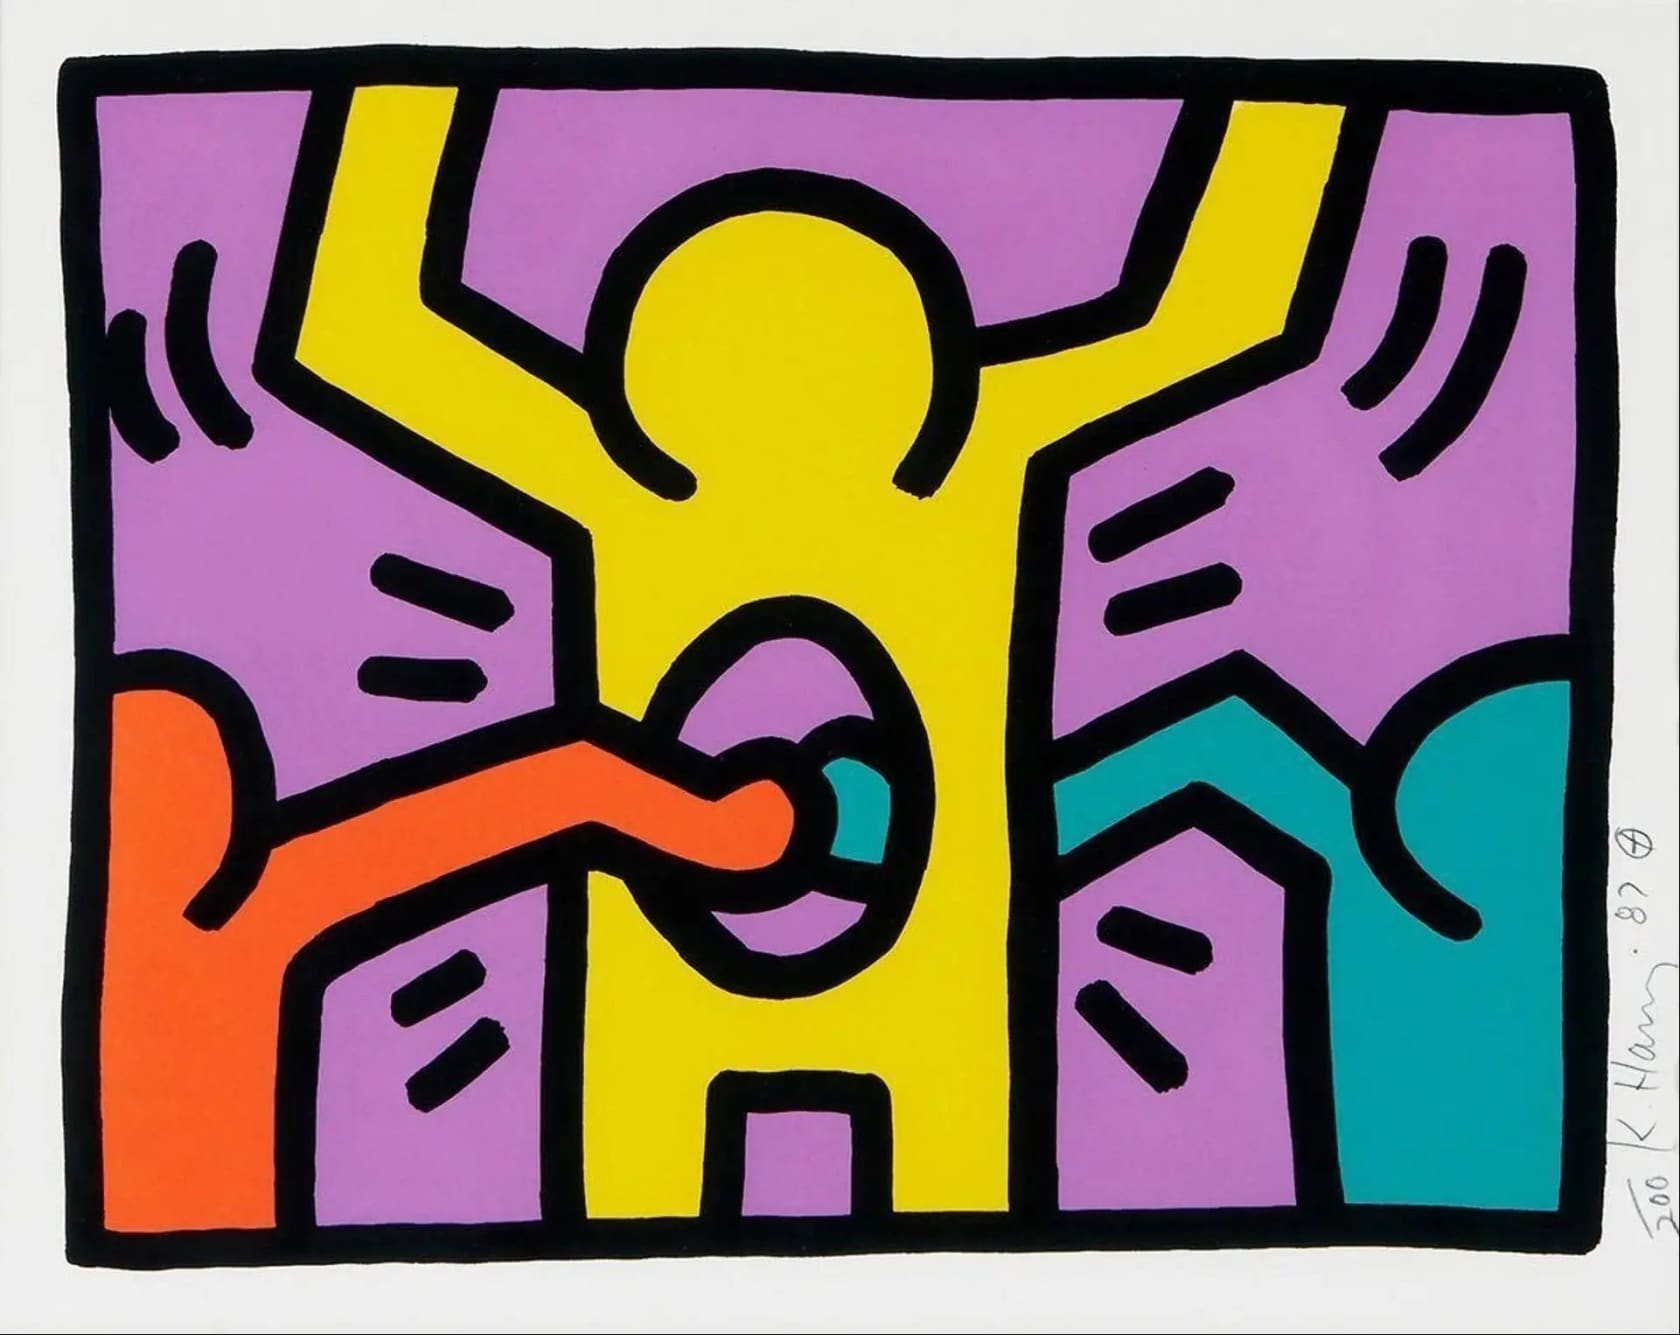 Keith Haring, Untitled from Pop Shop I, 1987